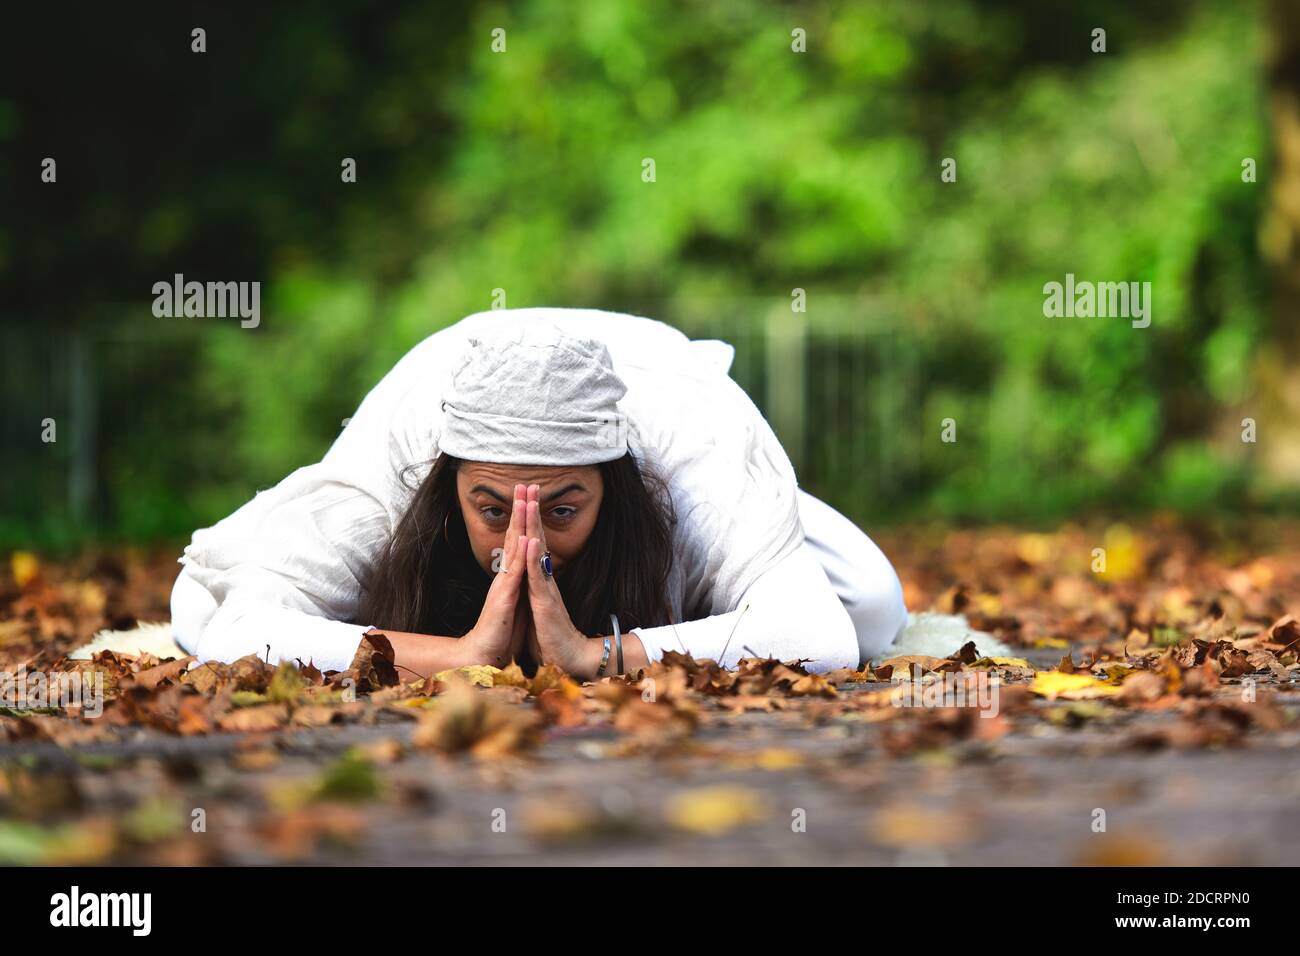 Yoga position among the autumn leaves in the park Stock Photo